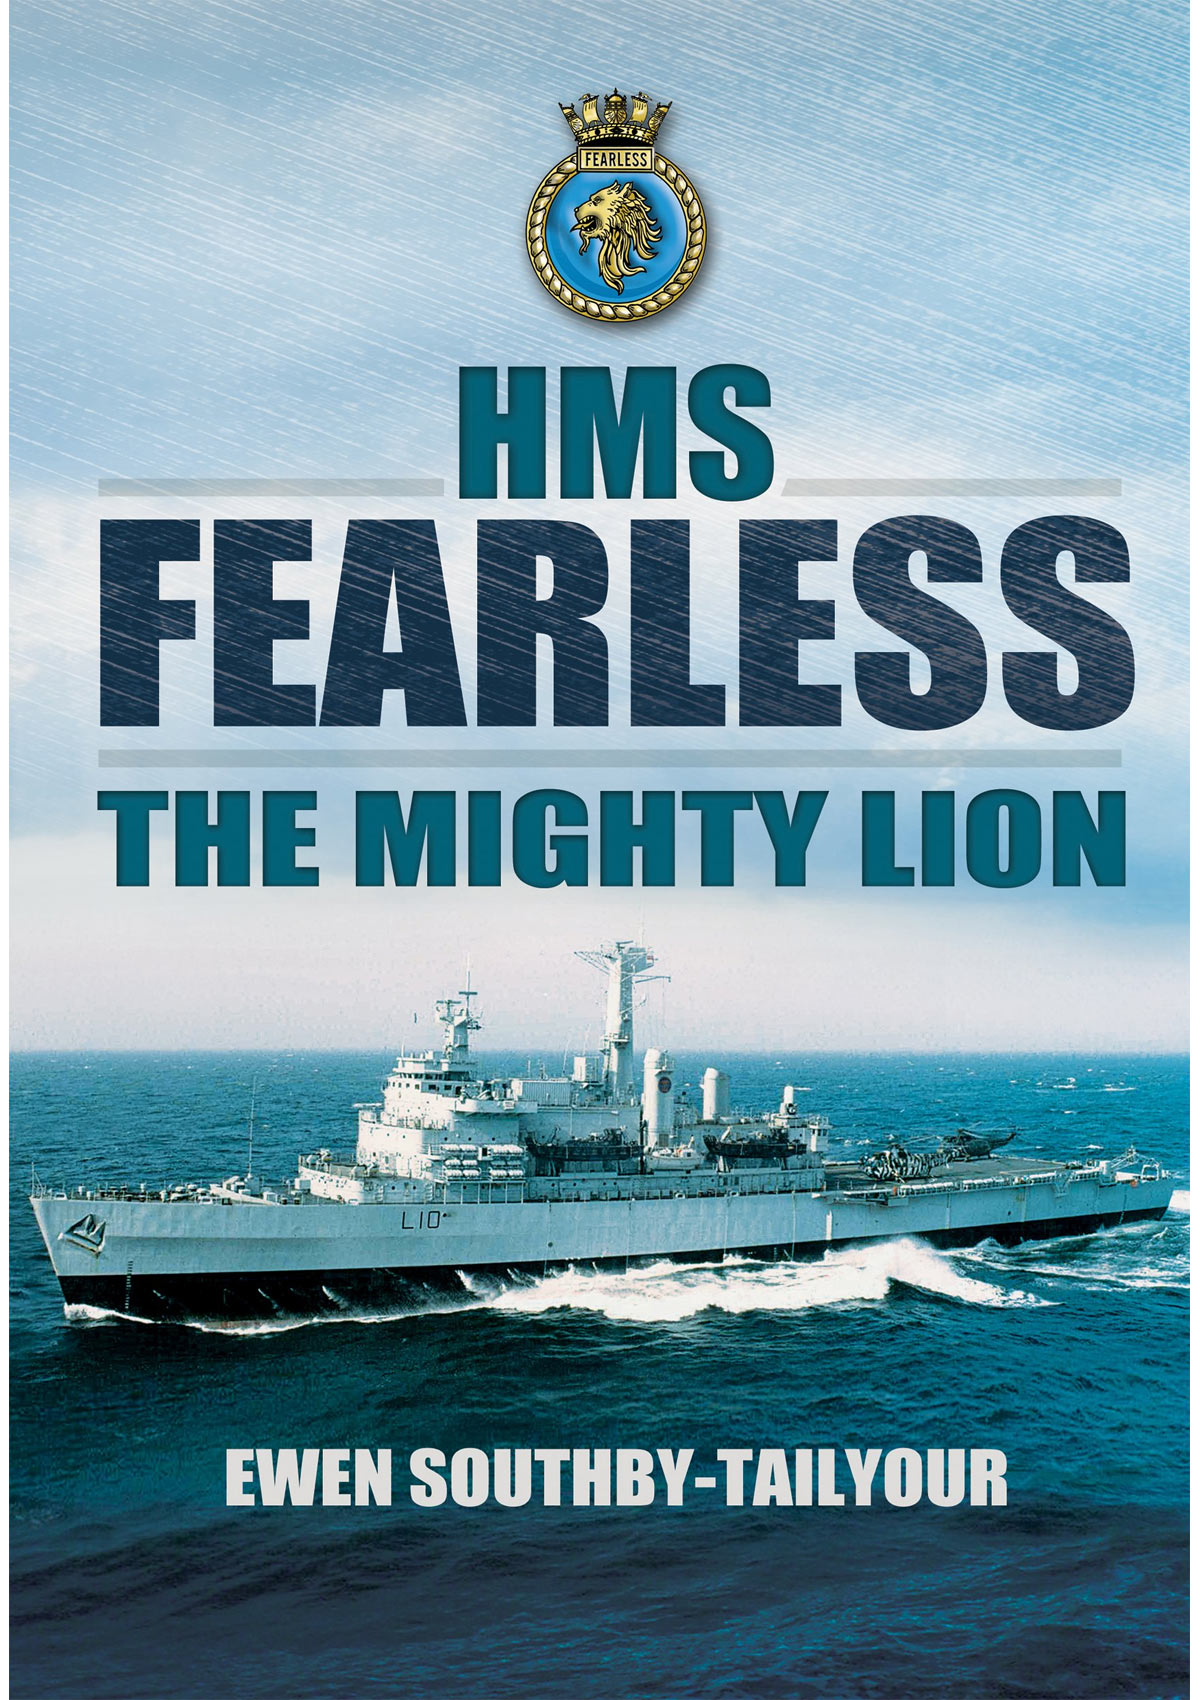 3646 :HMS Fearless: The Mighty Lion